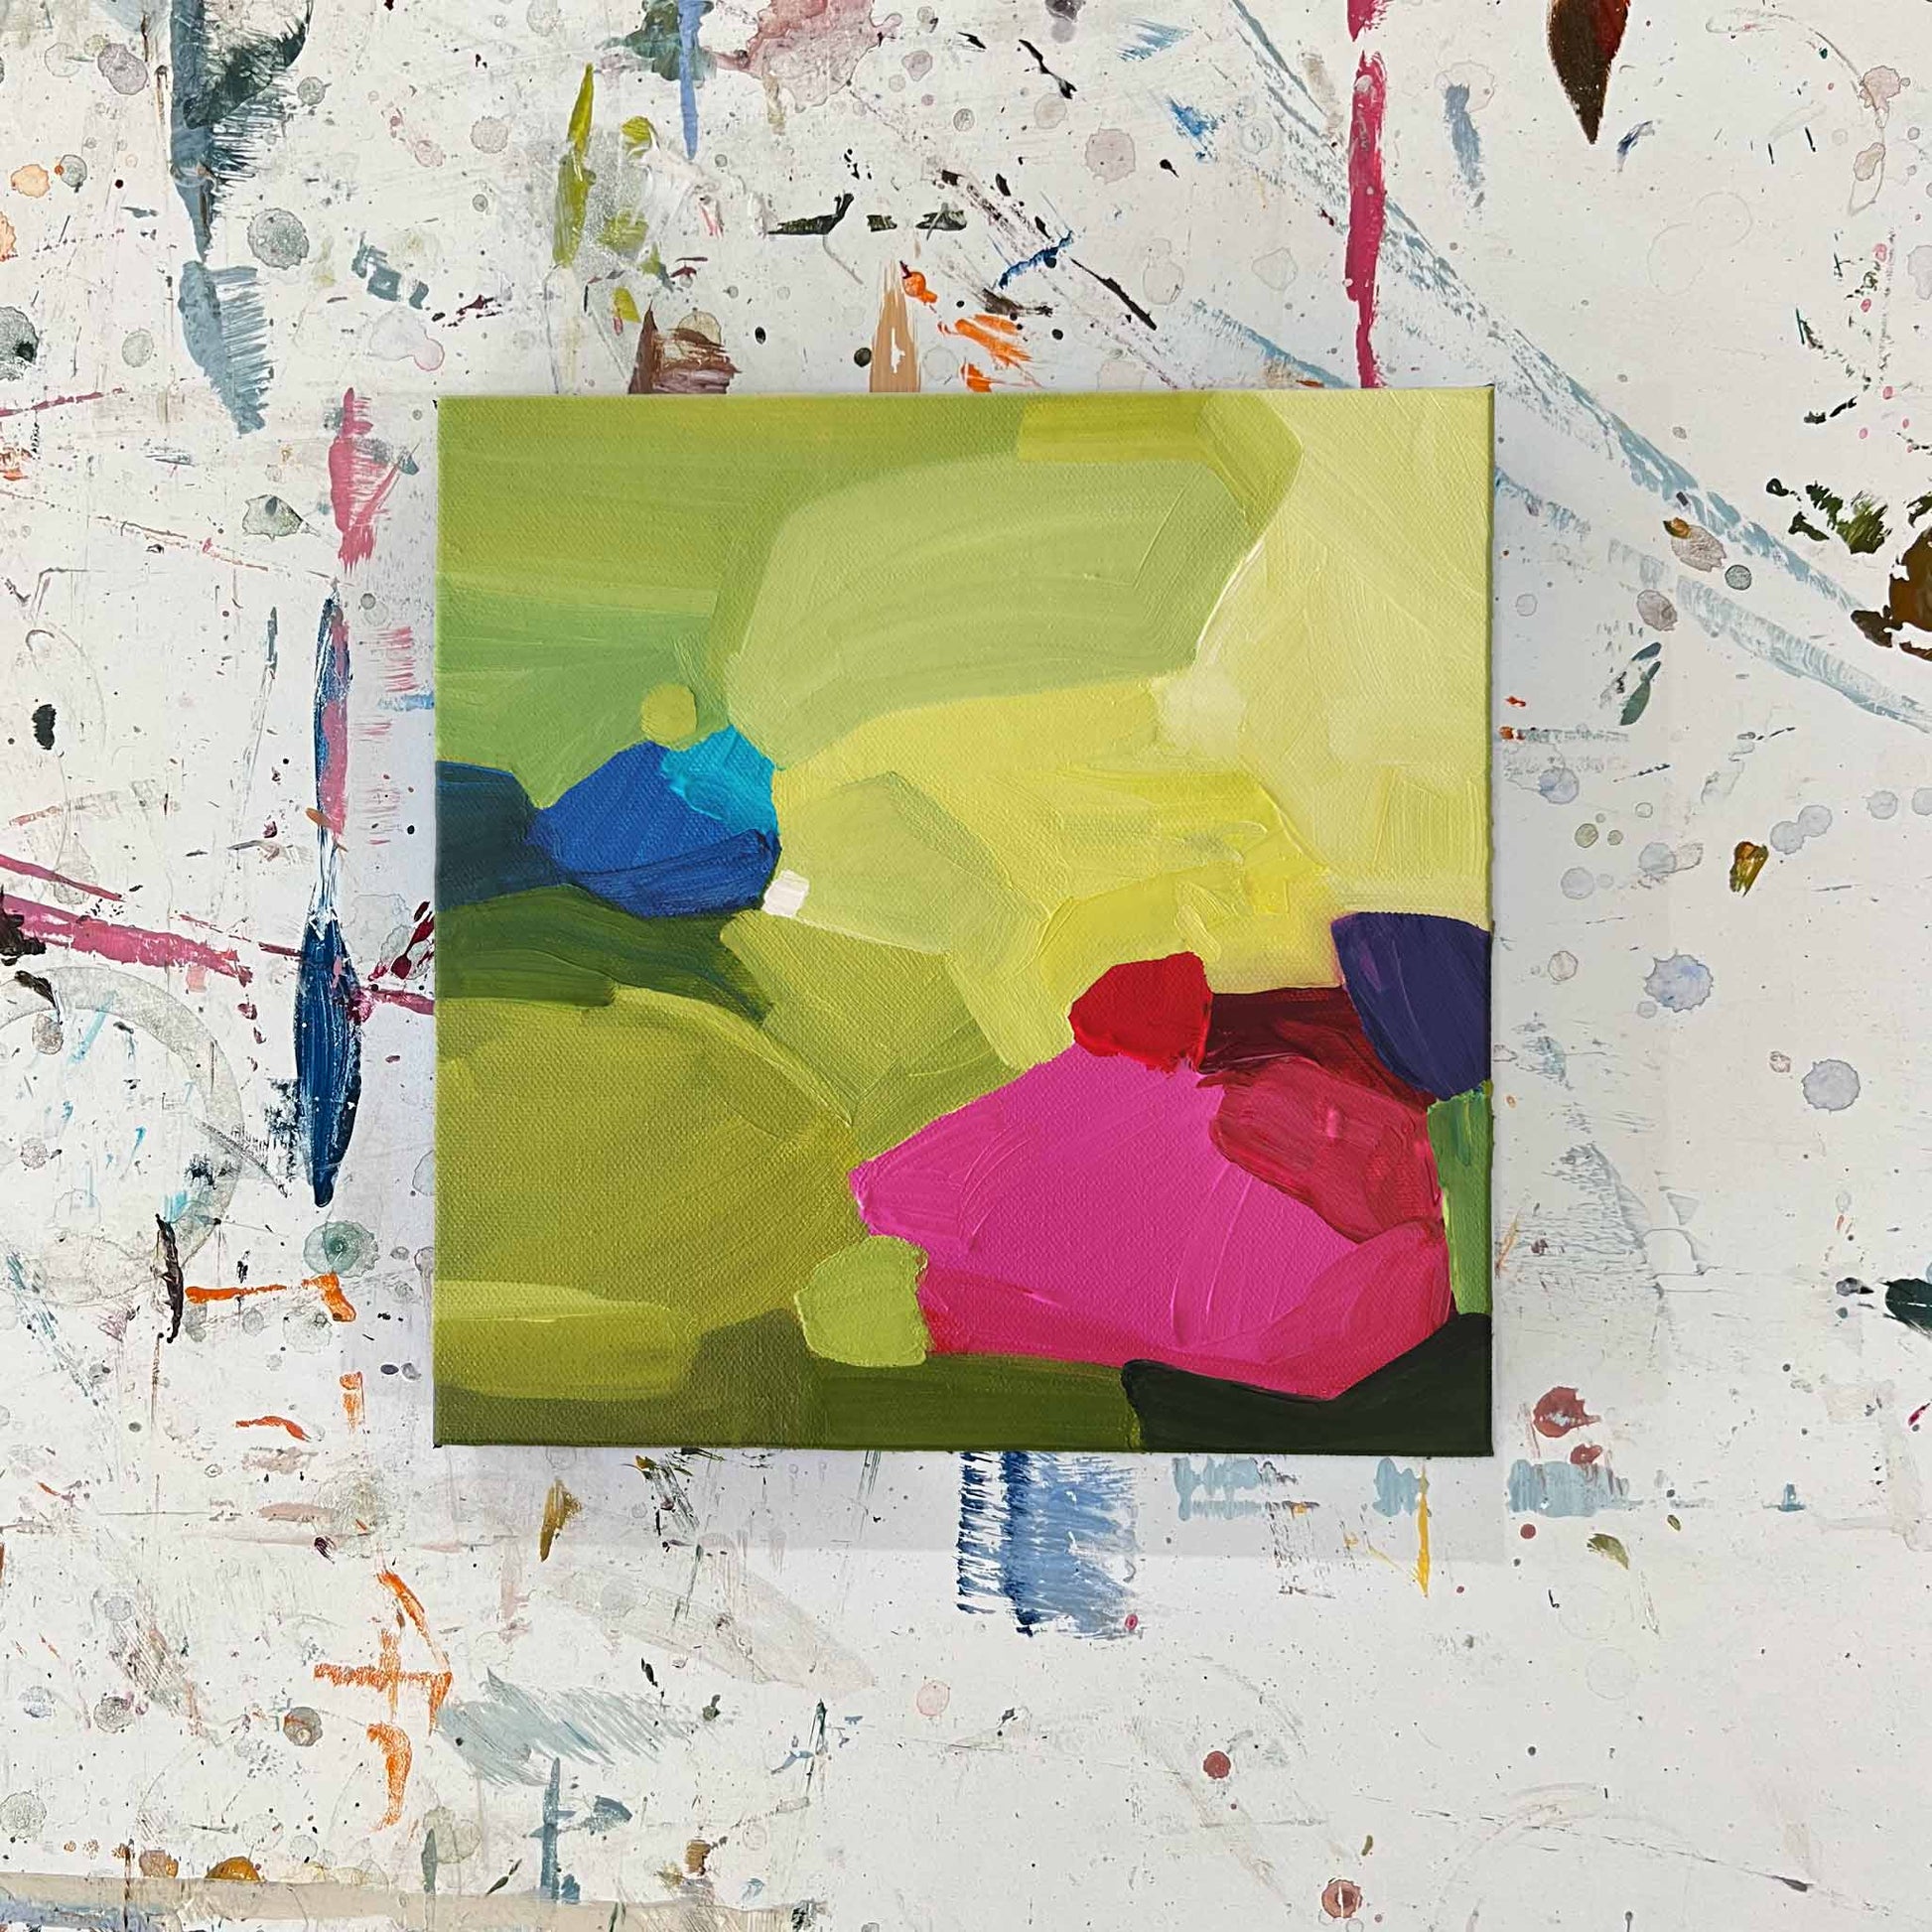 Top view of a small abstract painting with bright pink and blue shapes on a lime green background by Canadian abstract artist Susannah Bleasby